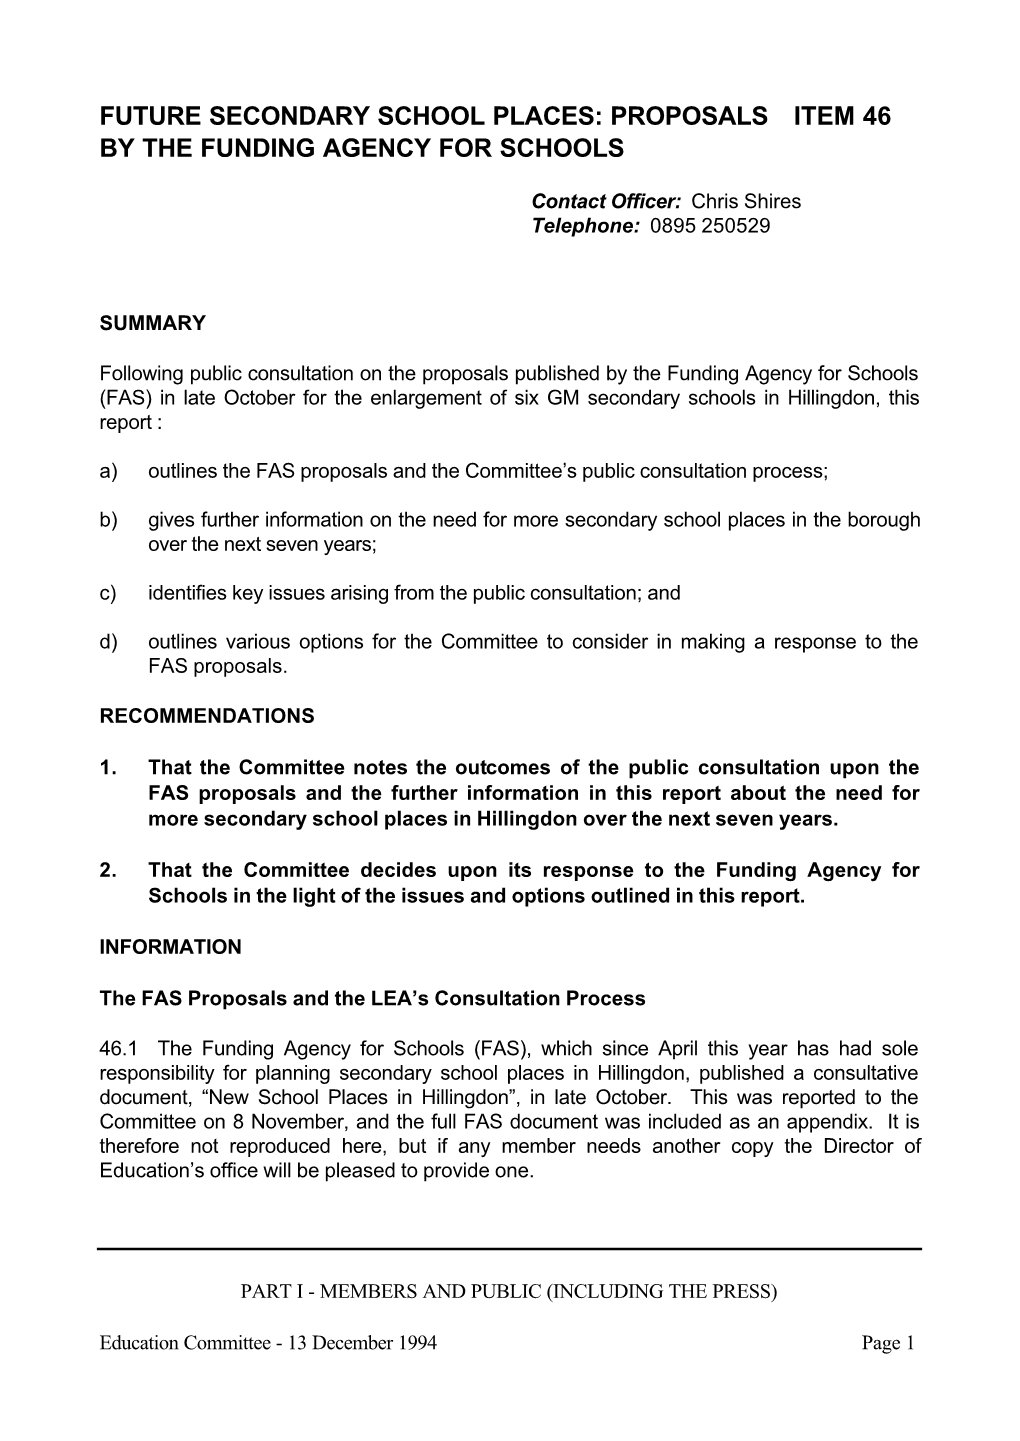 Proposals by the Funding Agency for Schools Item 46